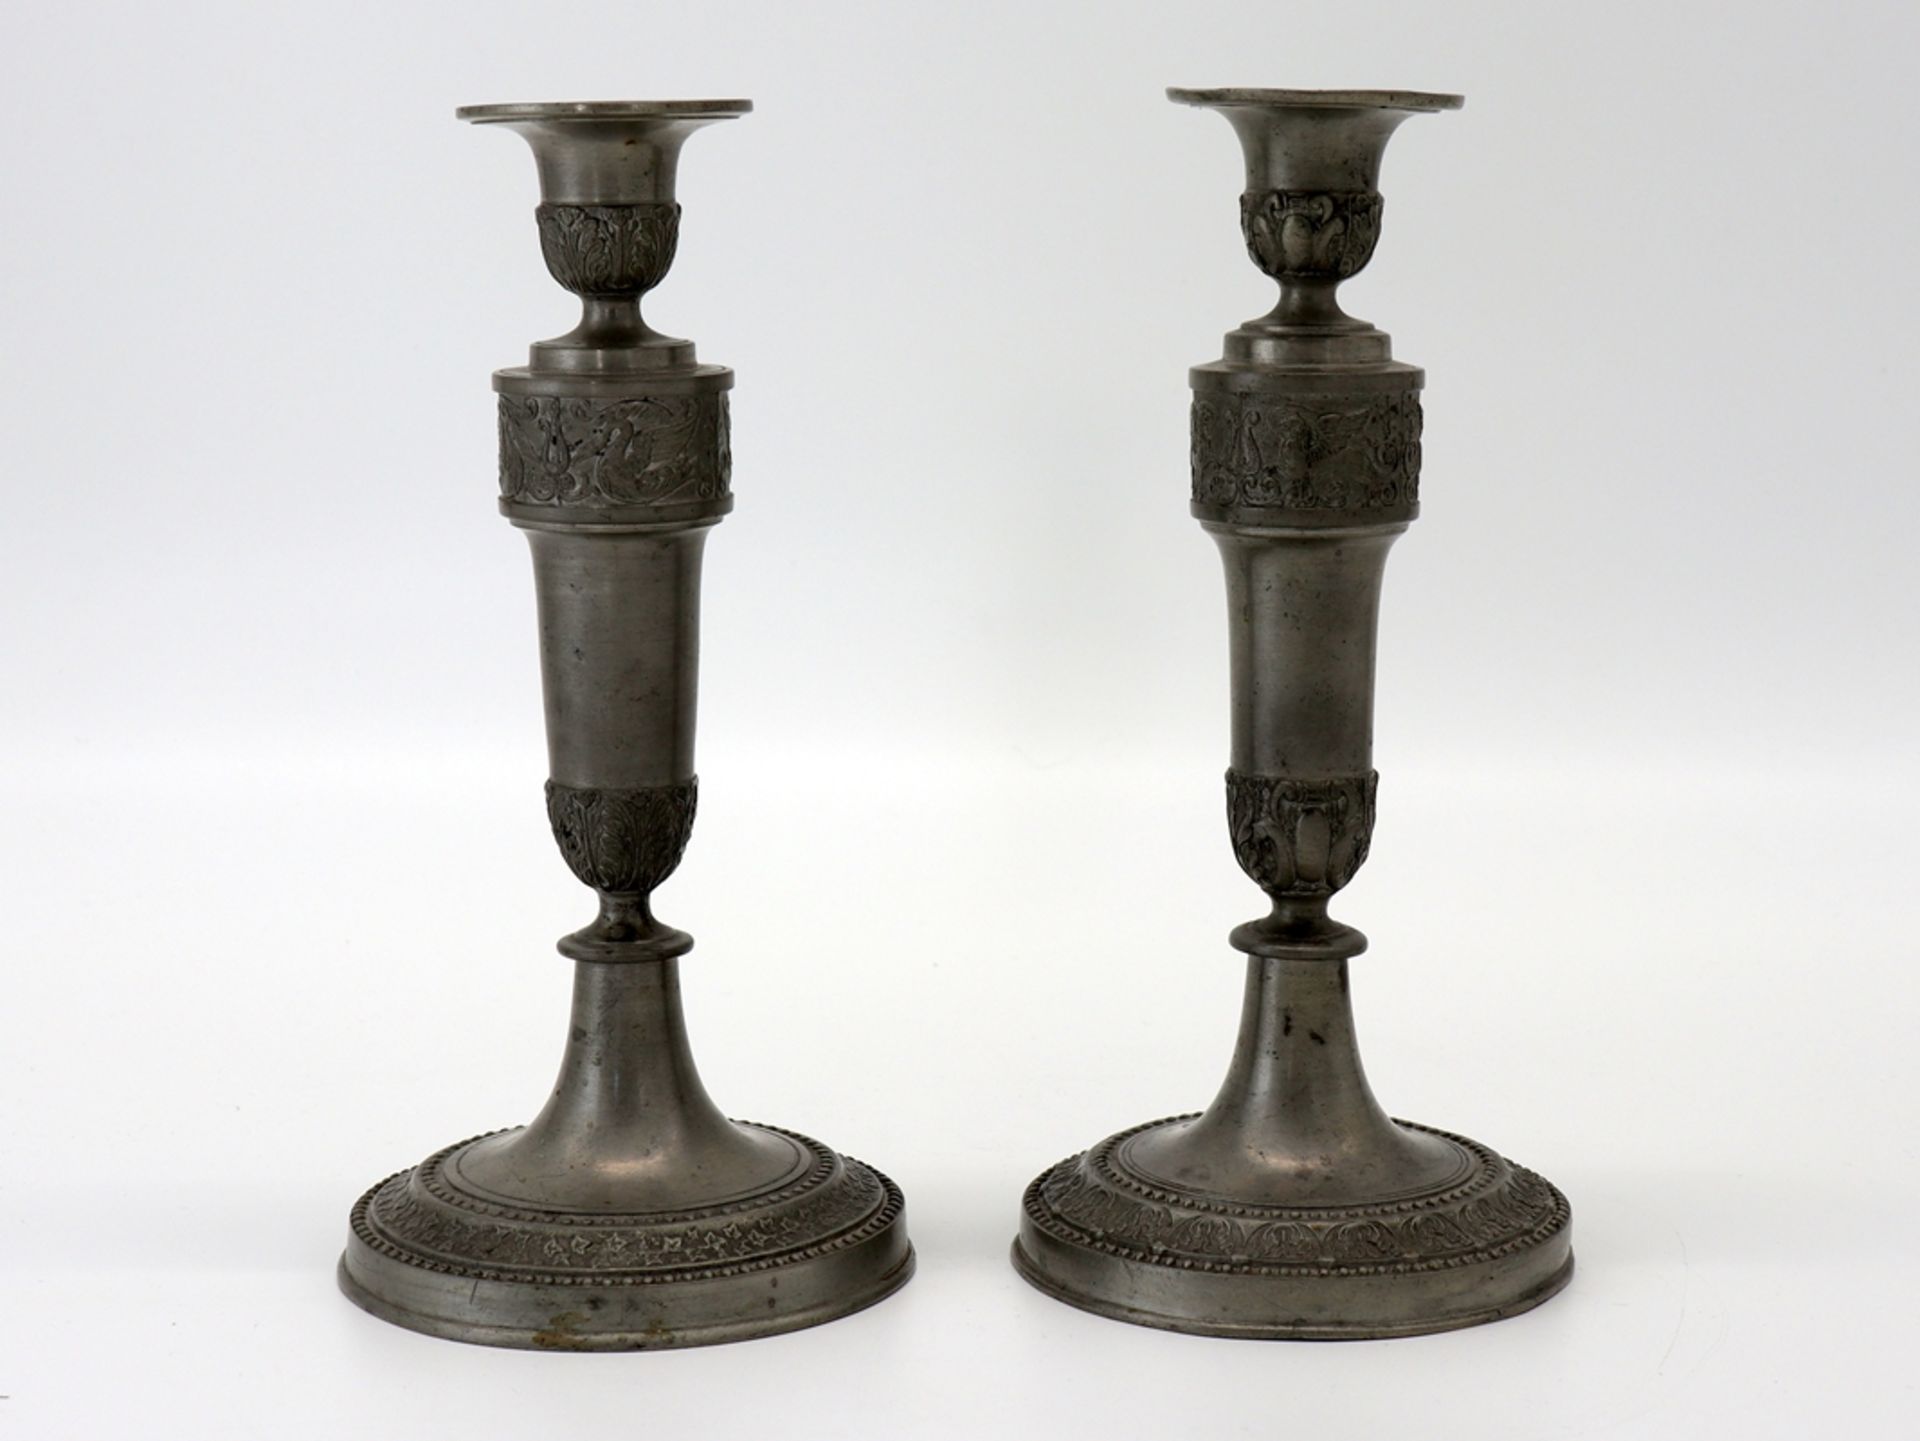 Pair of candlesticks pewter, dated 1866 - Image 7 of 7